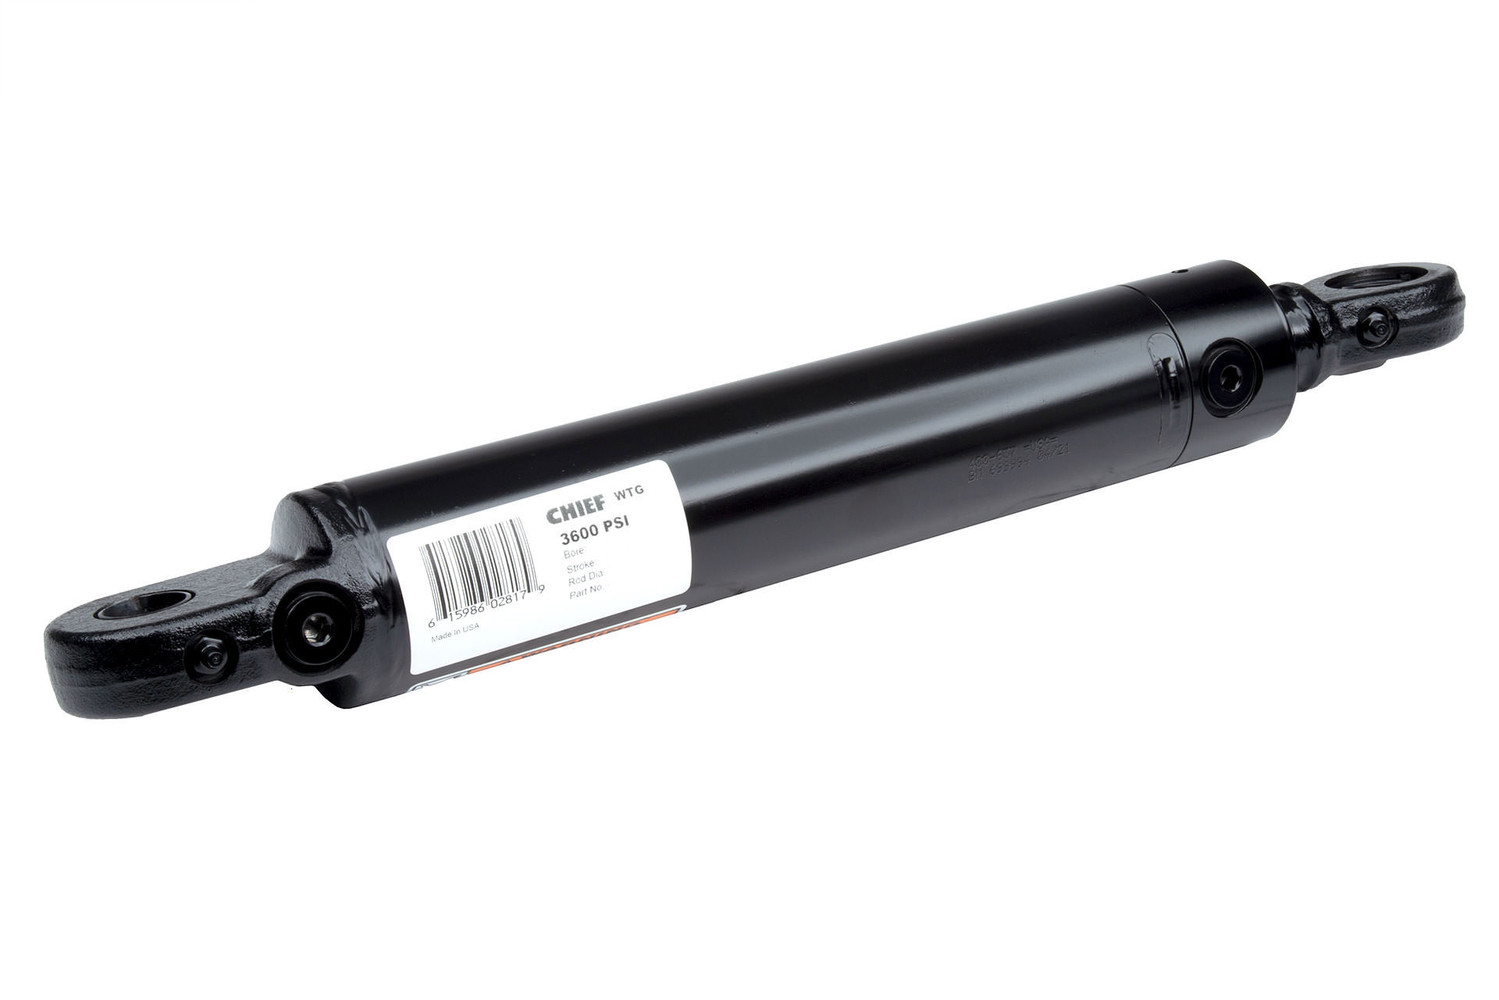 CHIEF WTG WELDED TANG HYDRAULIC CYLINDER: 4" BORE X 30" STROKE - 2" ROD